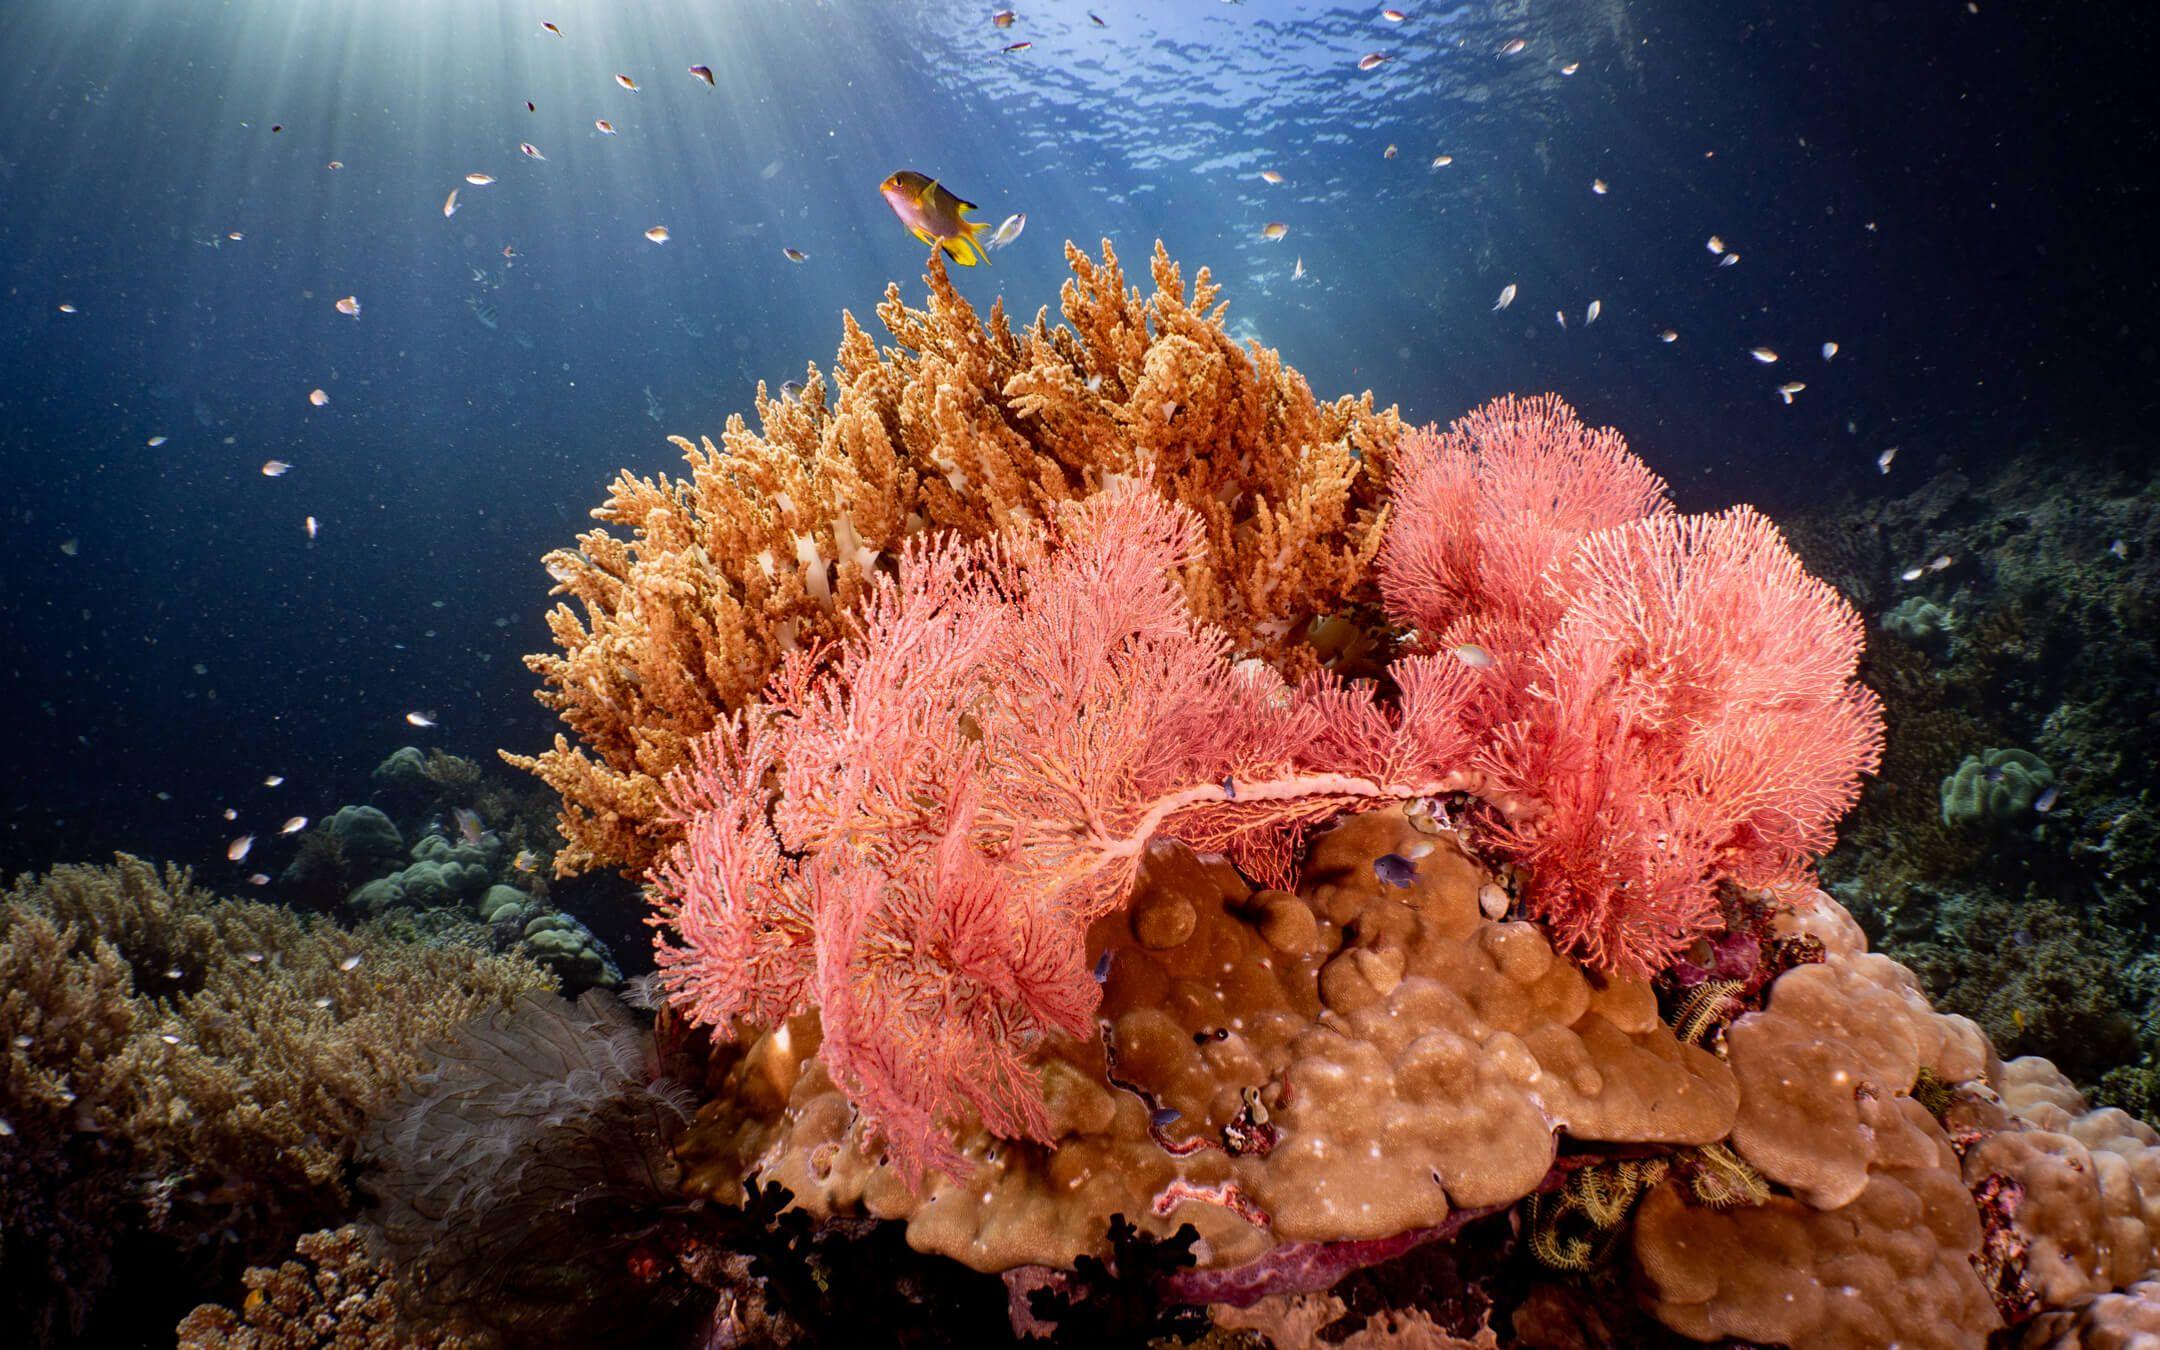 Coral Catch has managed to restore nearly 2,000 corals back into Indonesia’s coral reefs.
Photographer: Sonja Geier